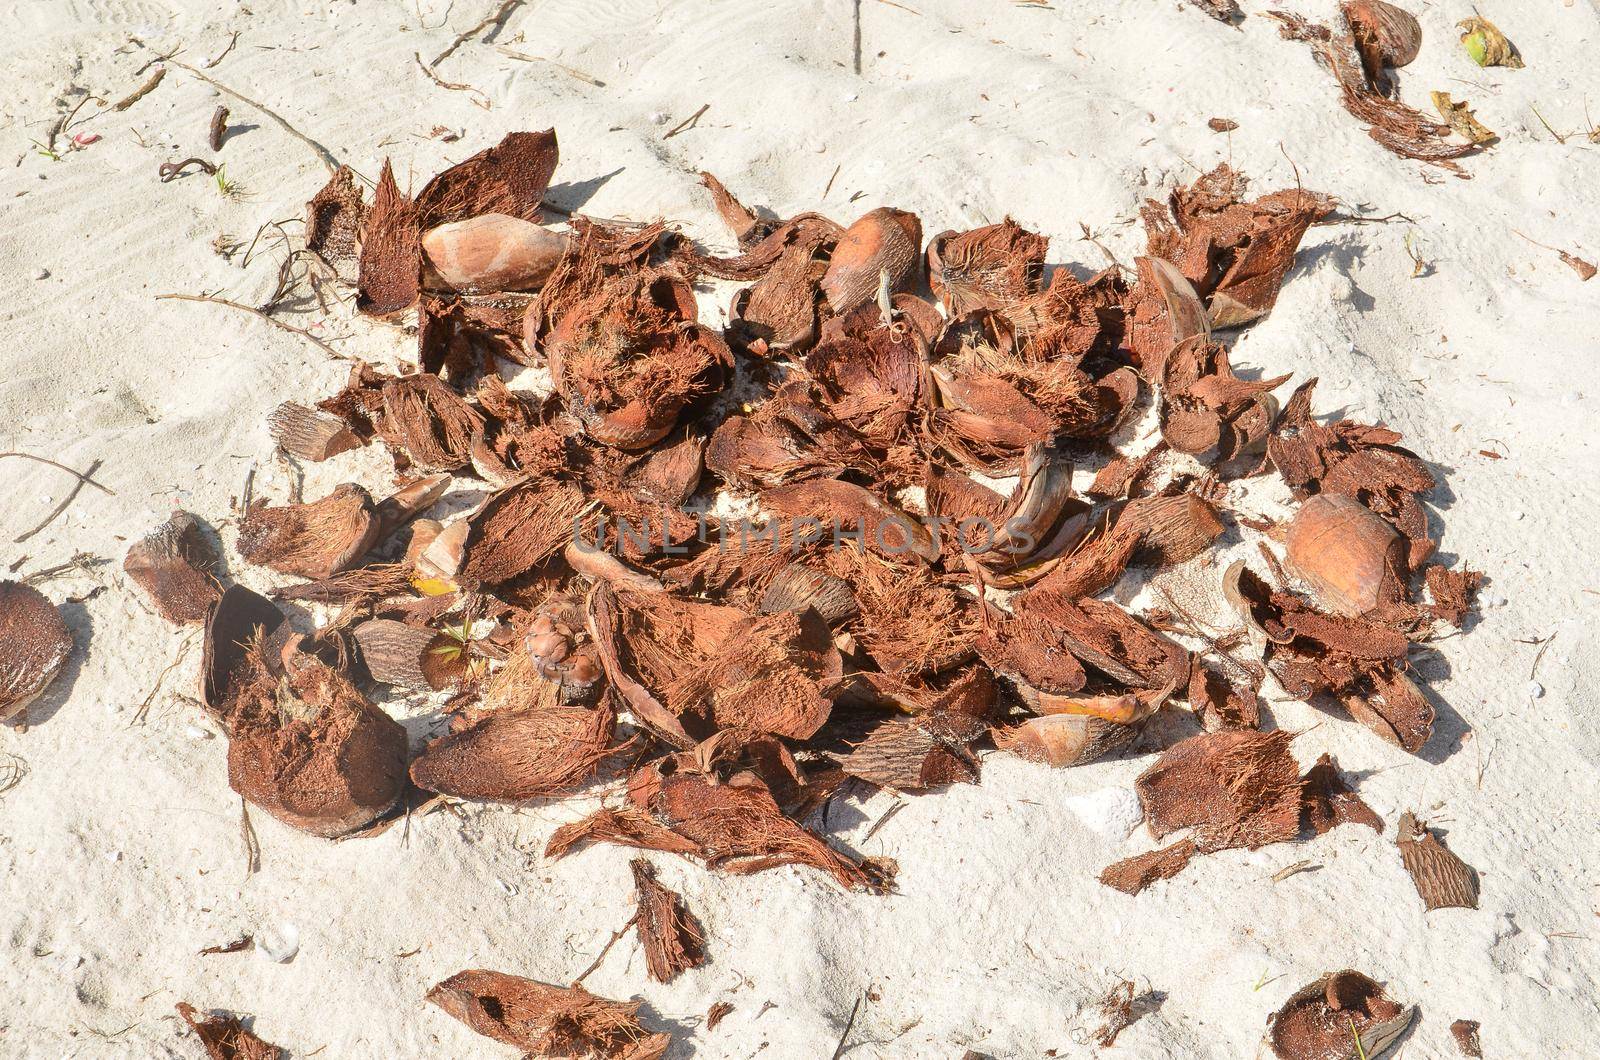 Coconut peel in the sand under the sun by Proff